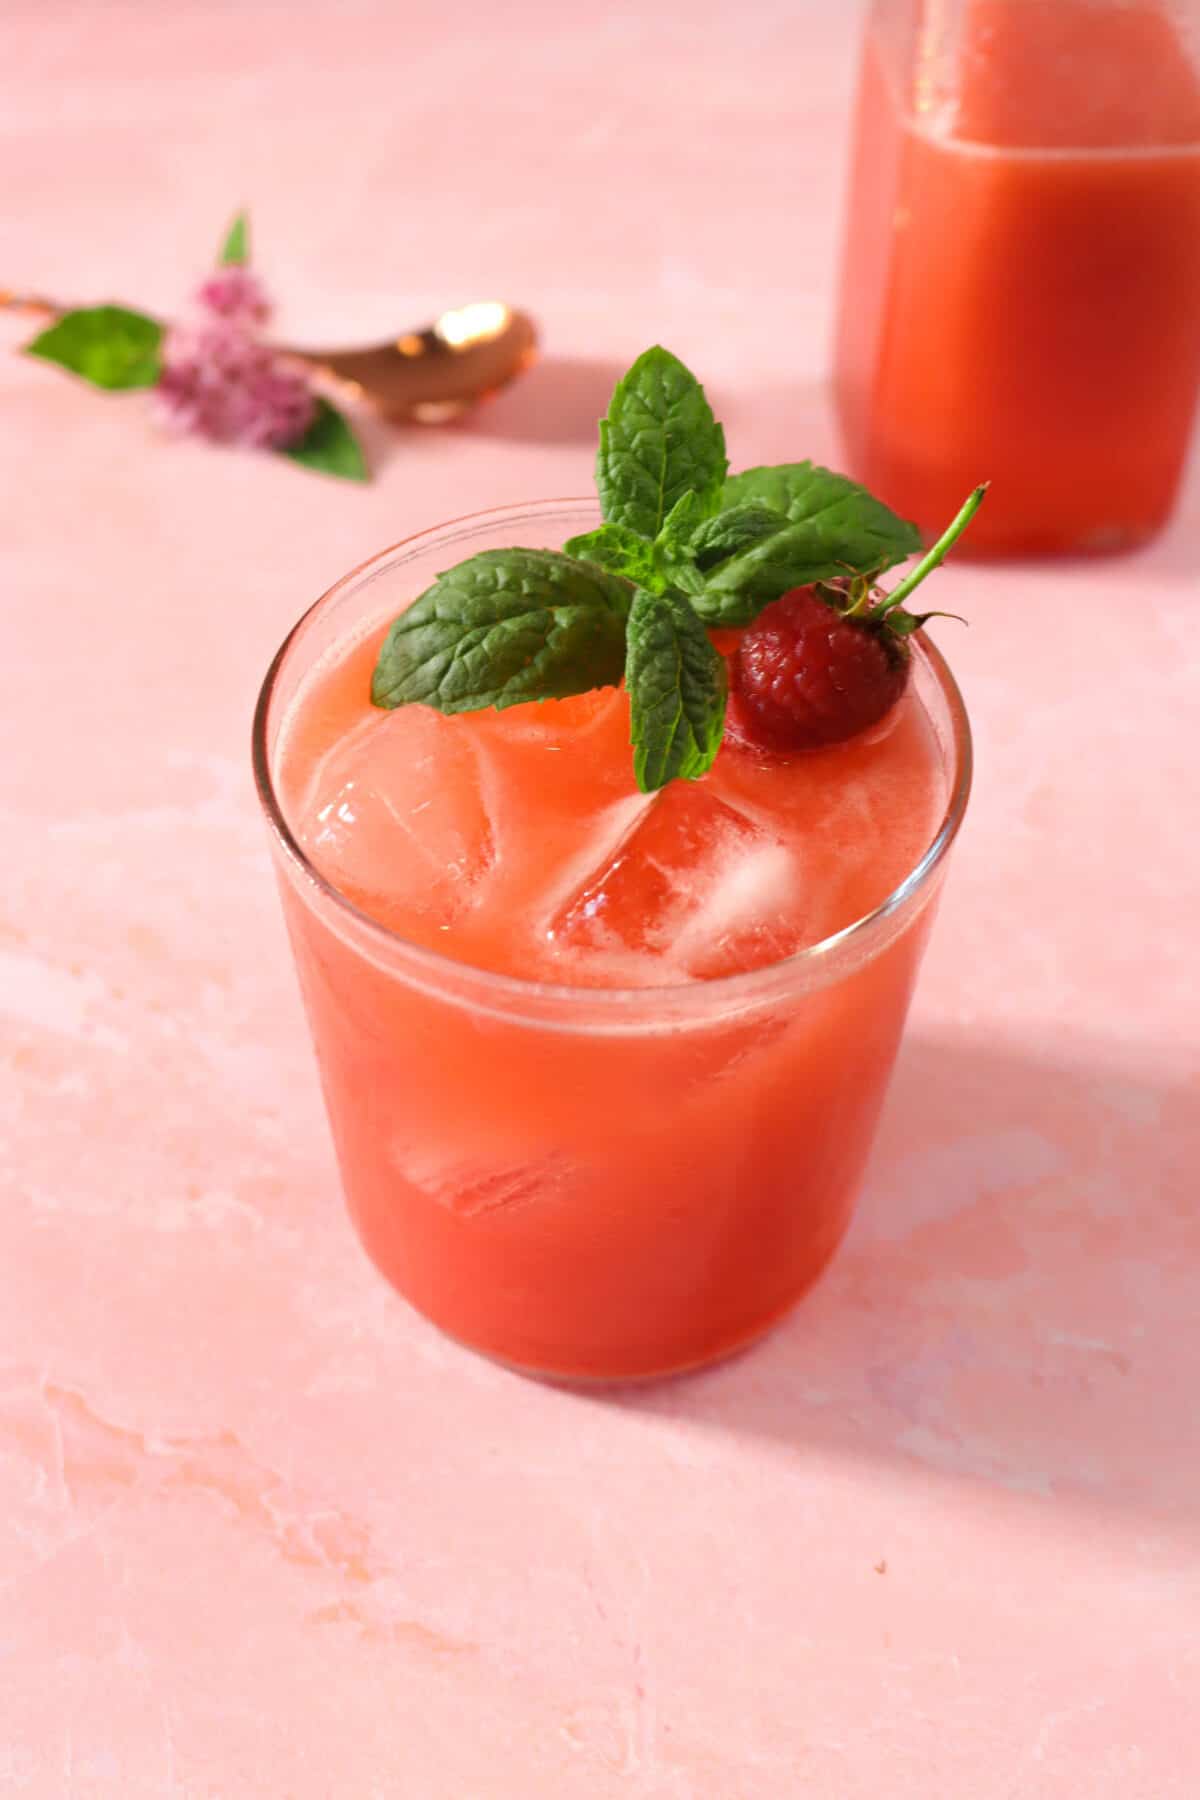 a glass of raspberry lemonade with a mint sprig, pink flowers, and a copper spoon